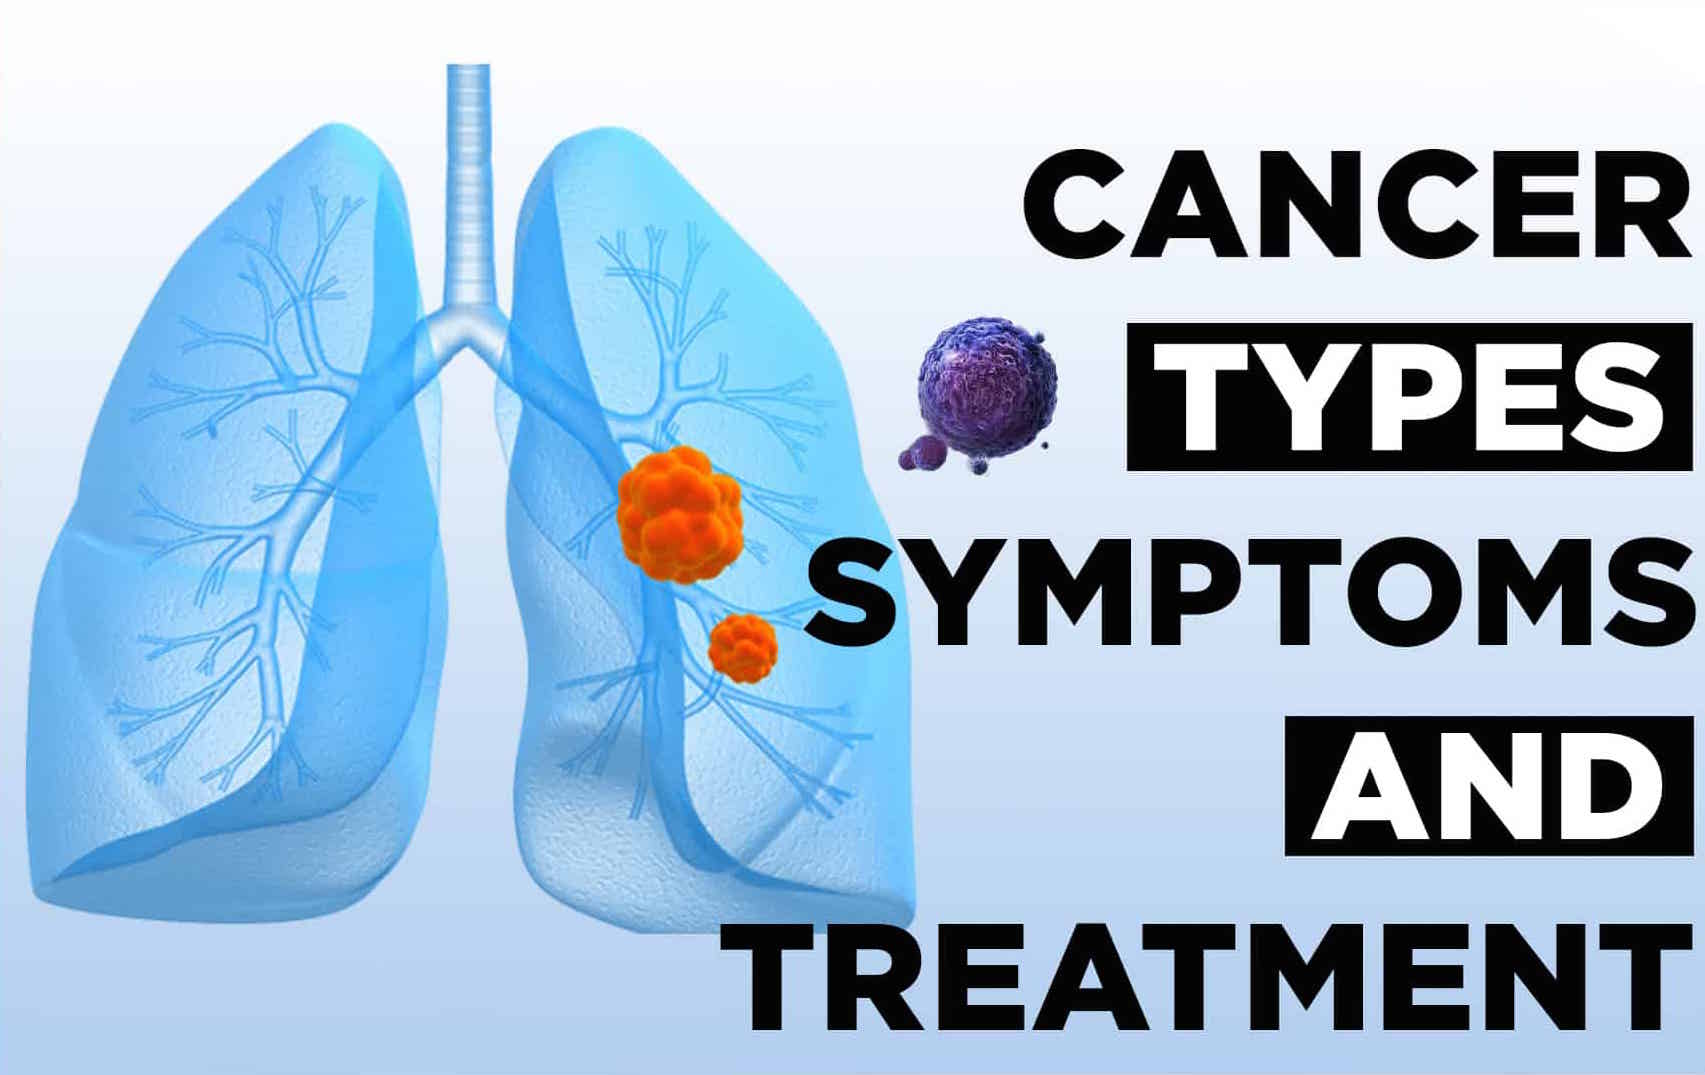 Cancer Types, Symptoms, Treatment and Prevention